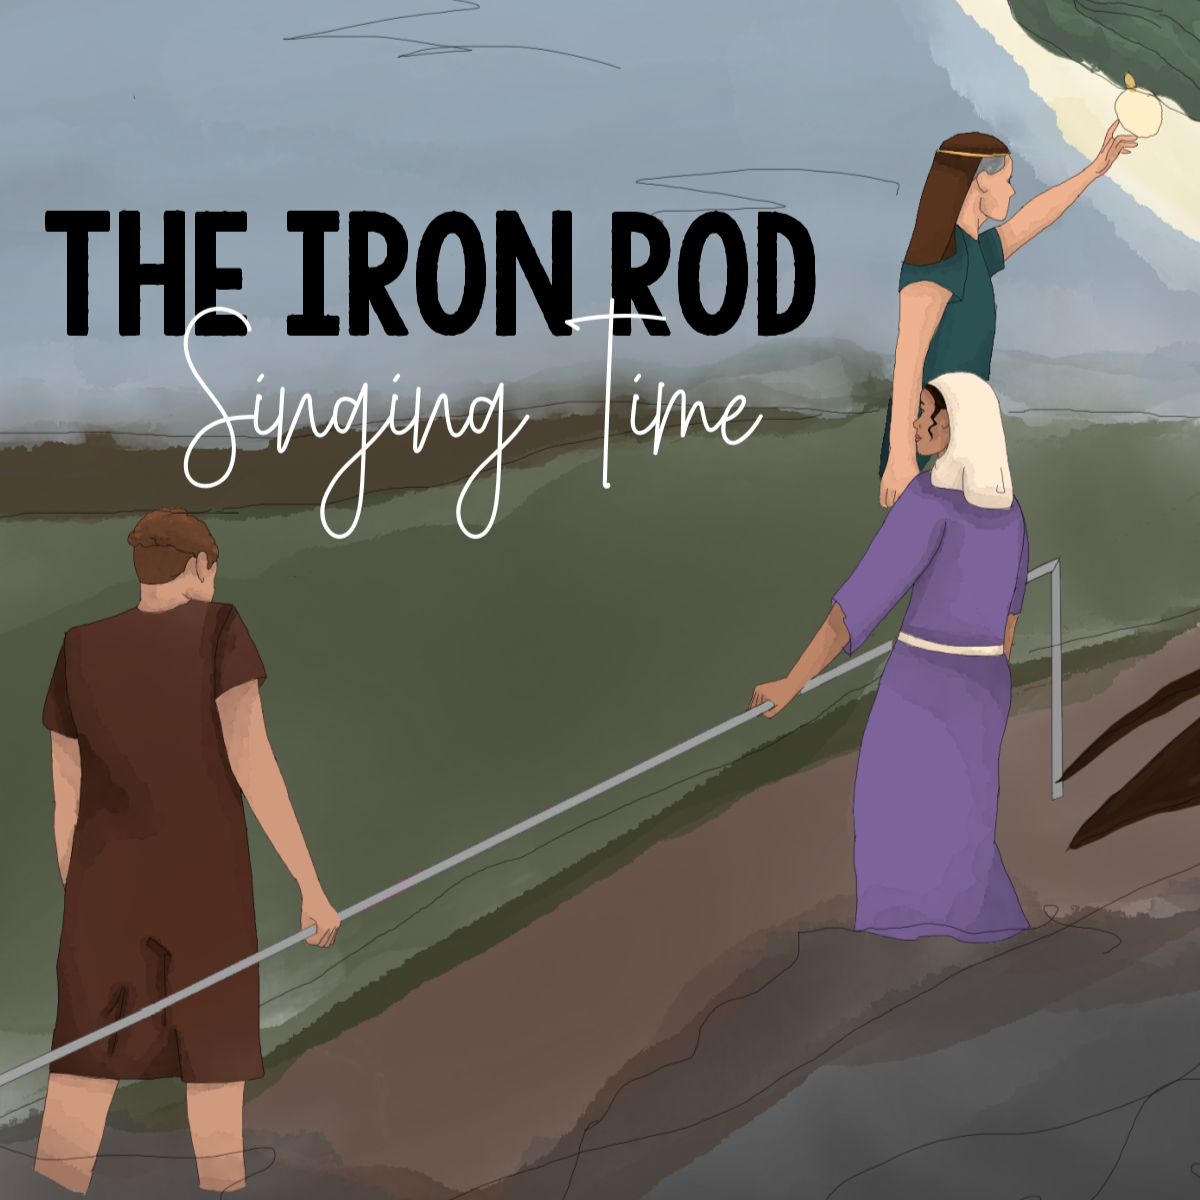 22 The Iron Rod singing time ideas for Primary Music Leaders. Use this fun teaching activities for The Iron Rod hymn including a custom art flip chart, paper plates, pipe chimes, song picture puzzle, first letters, mad gab, pass the iron rod and more.